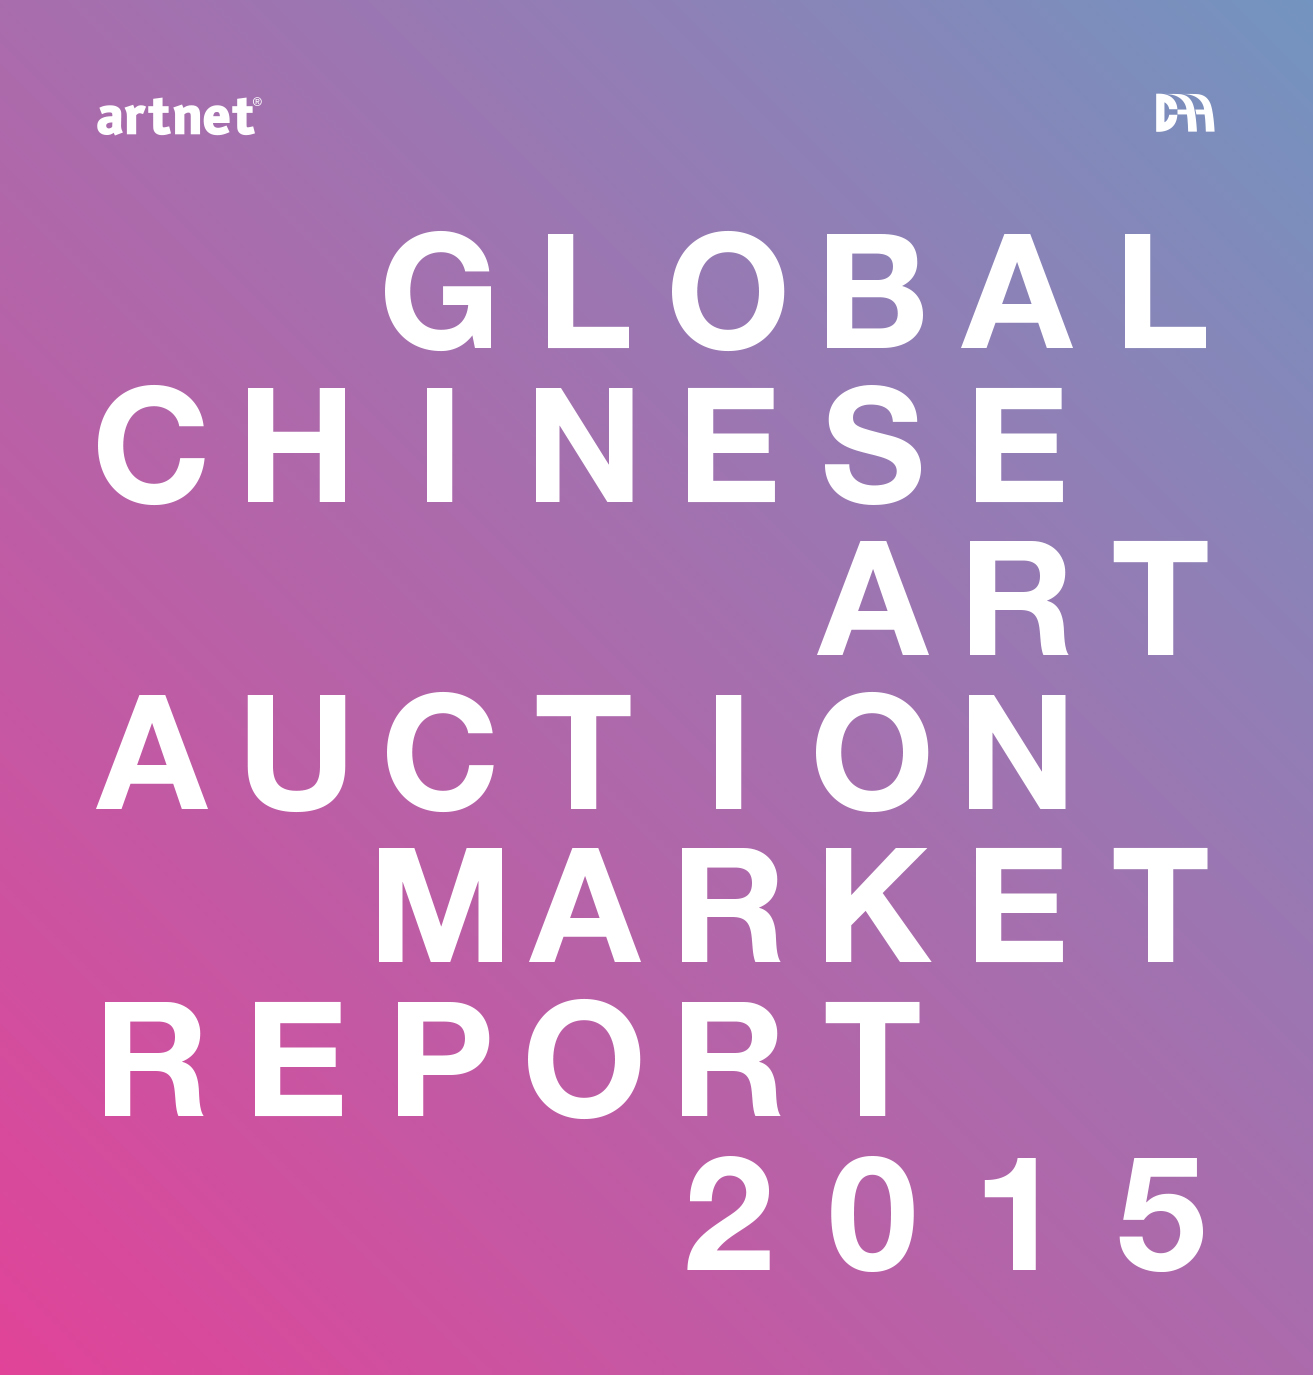 Global Chinese Art Auction Market Report 2015